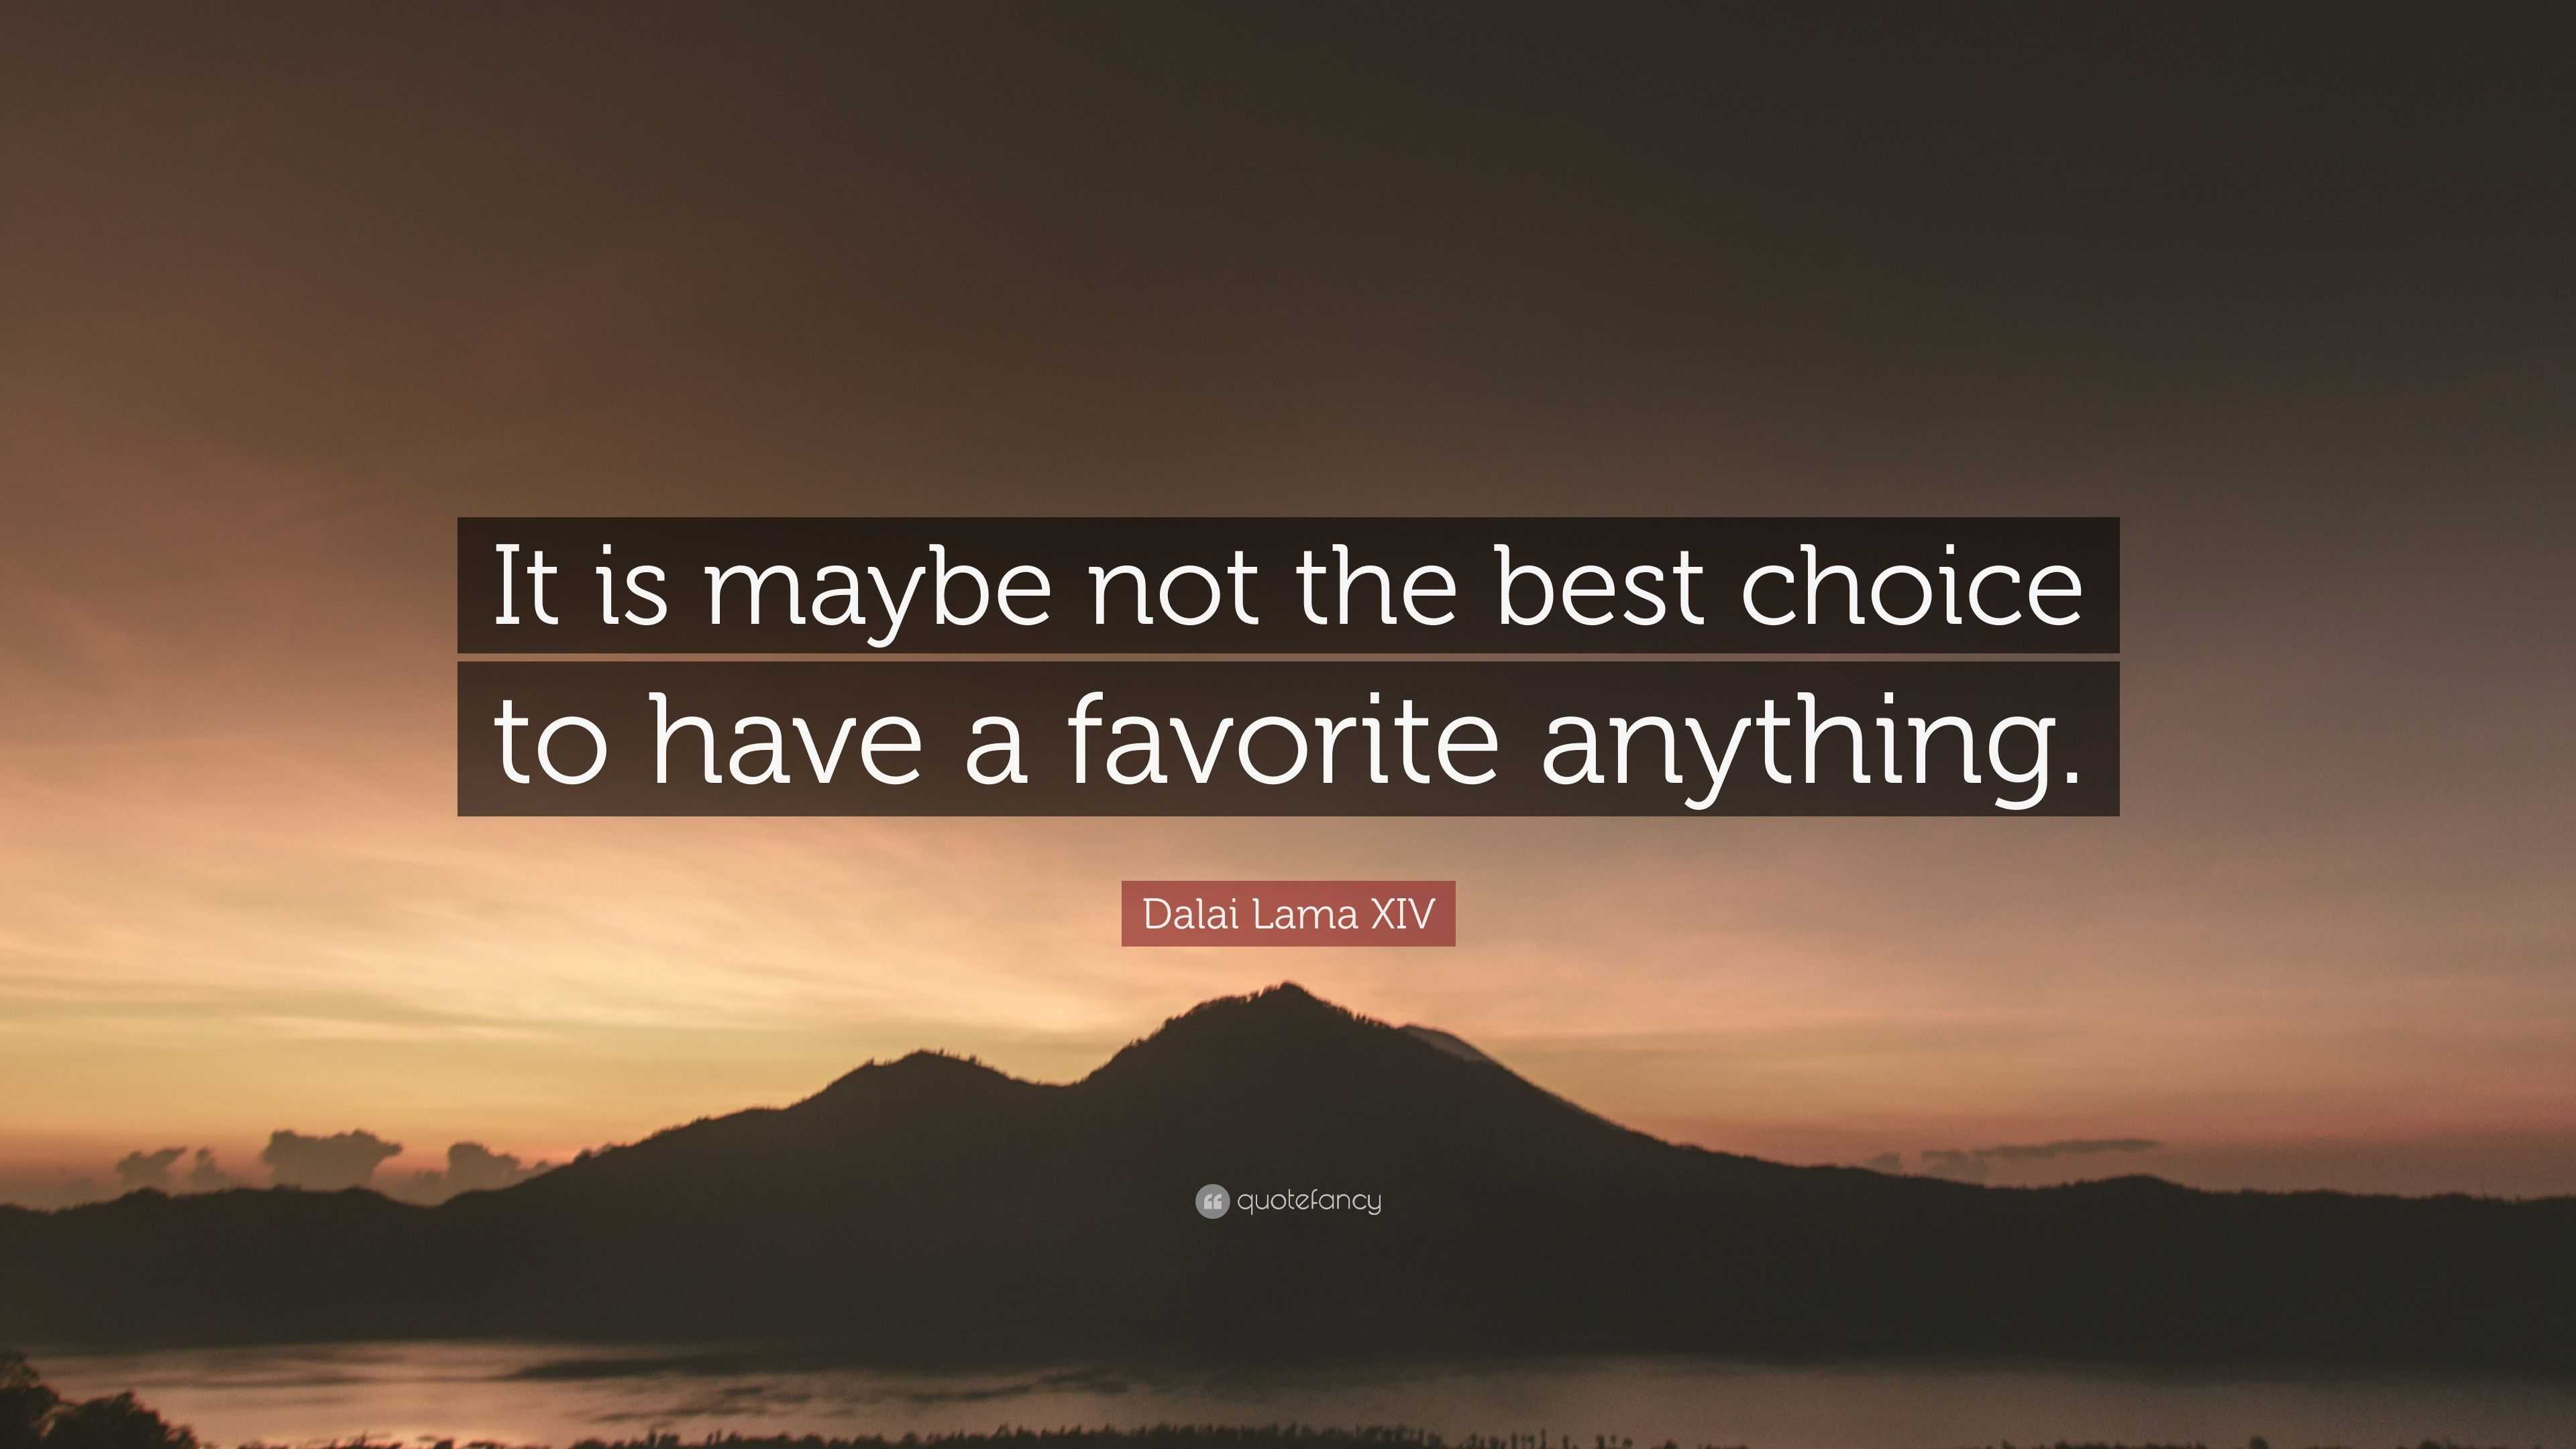 Dalai Lama XIV Quote: “It is maybe not the best choice to have a favorite  anything.”